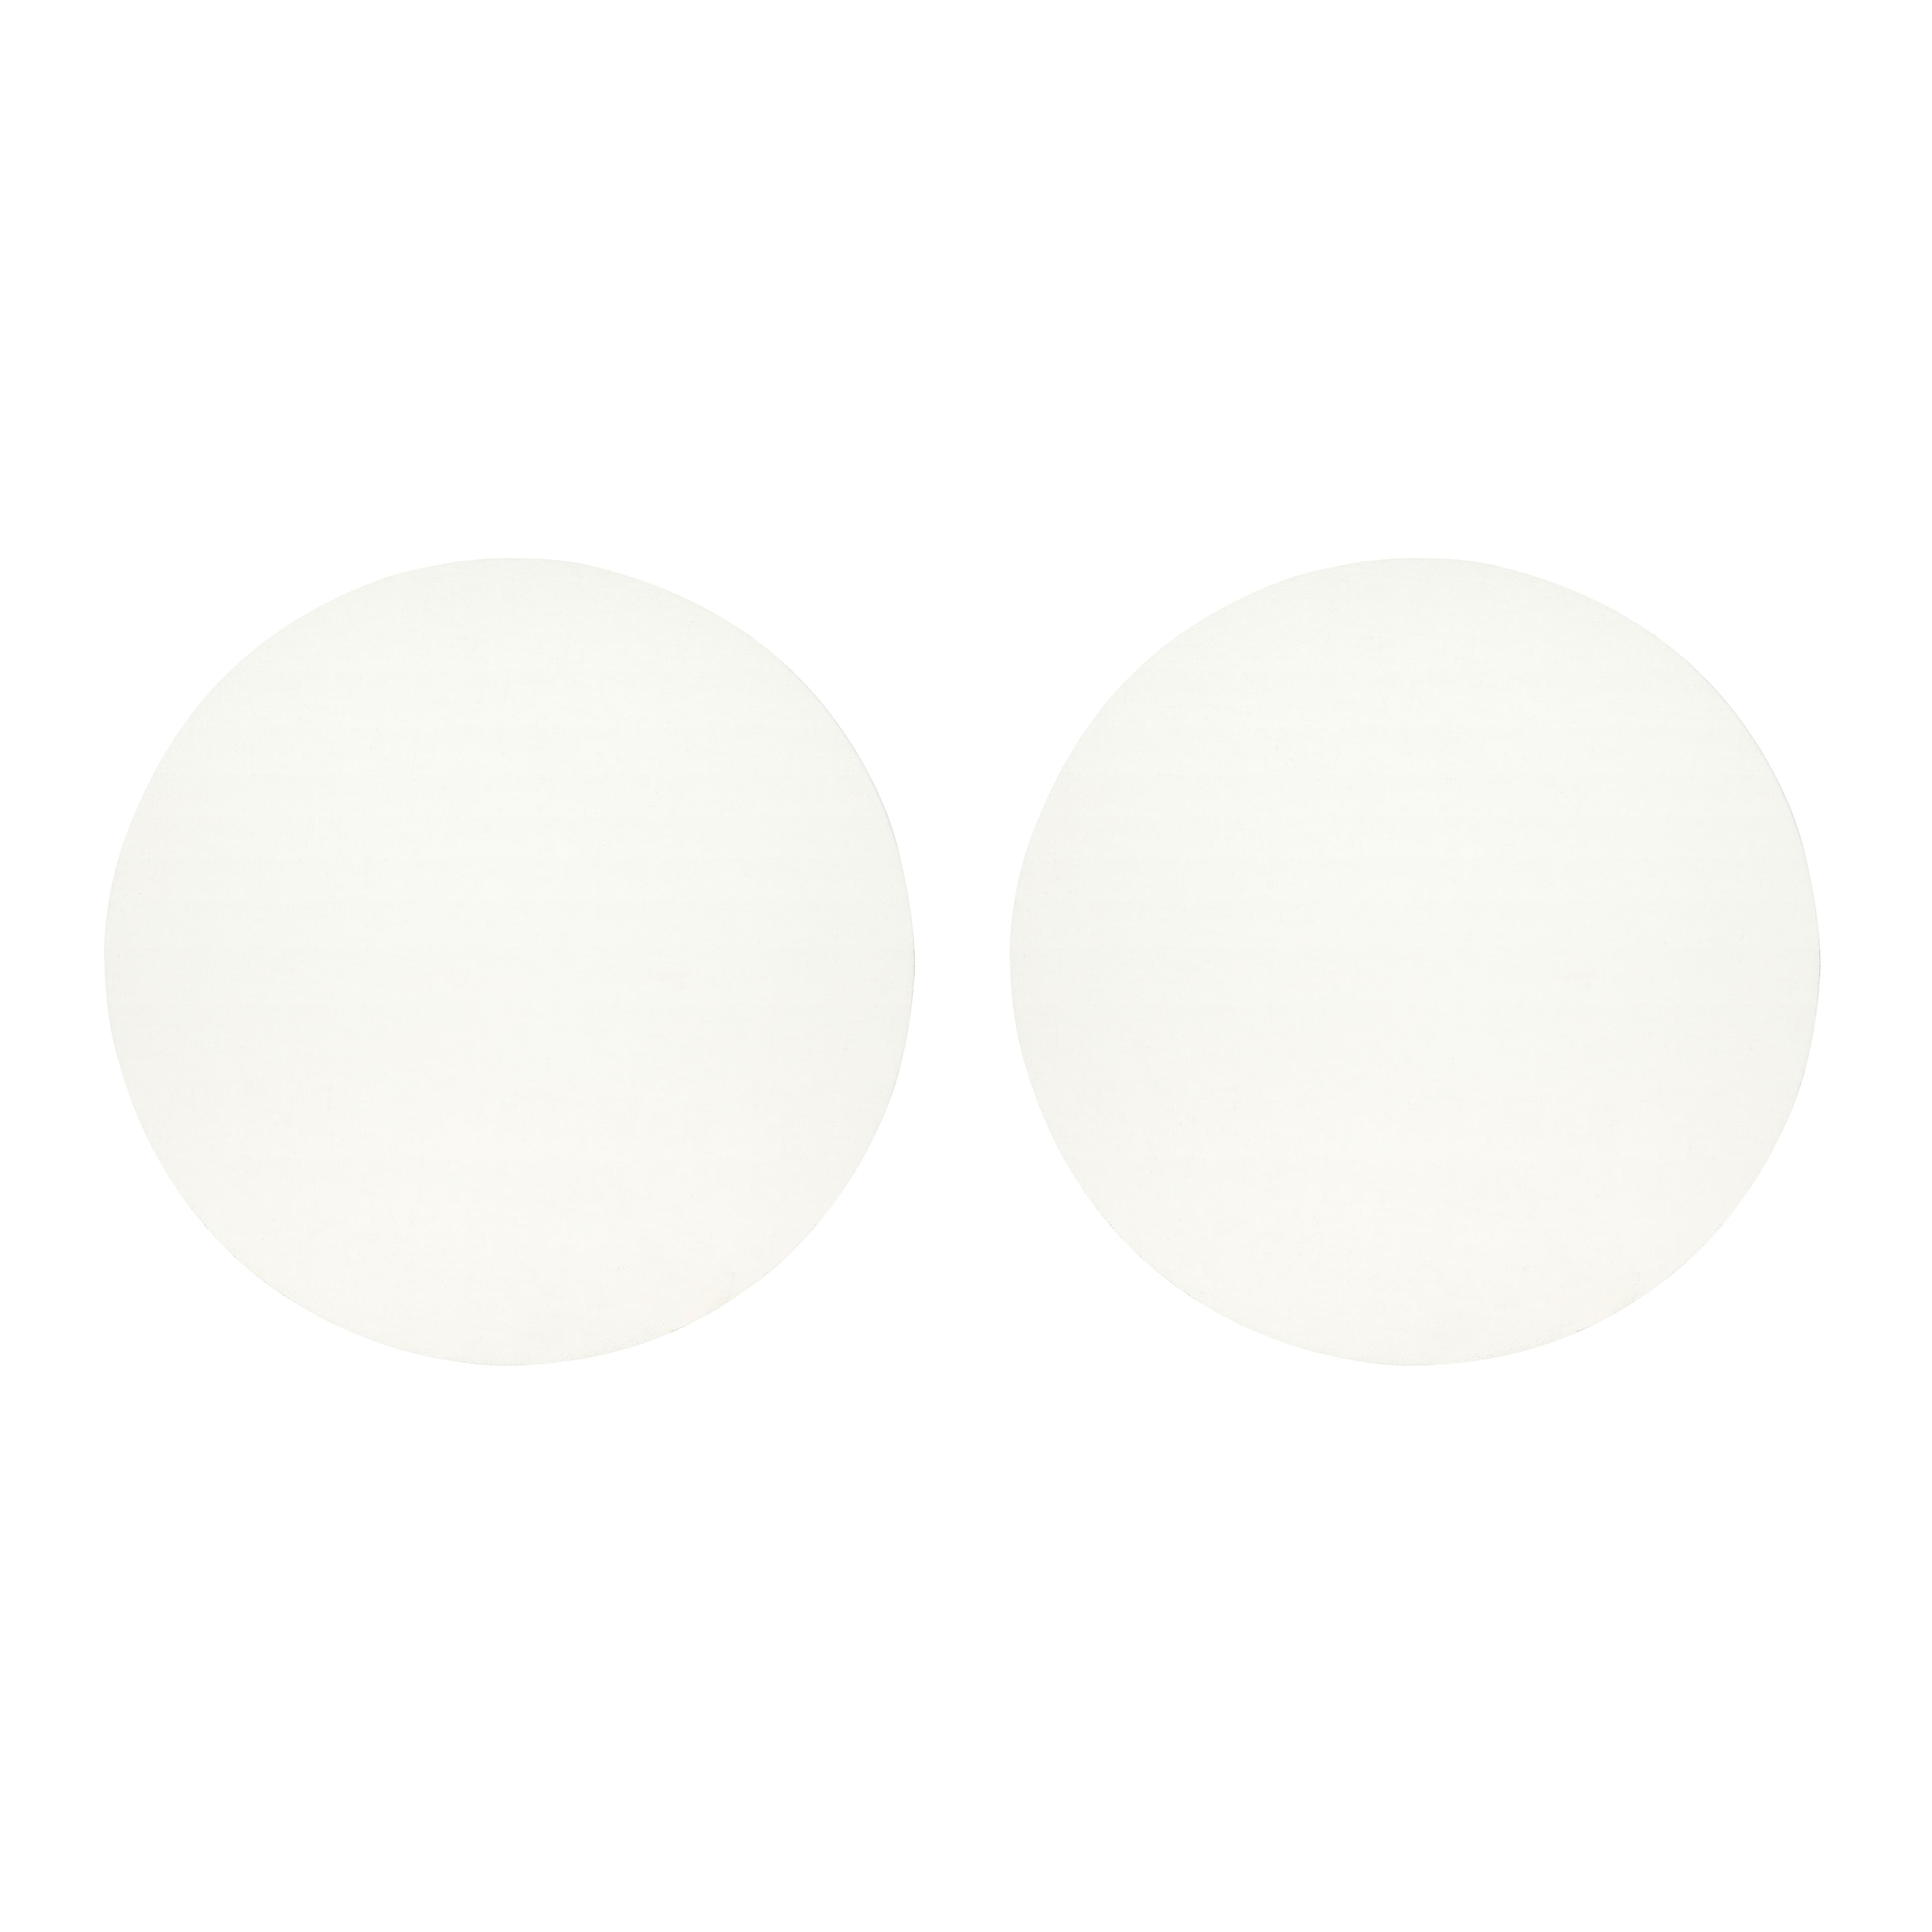 10&#x22; Round Shaped Canvases, 2ct. by Creatology&#x2122;